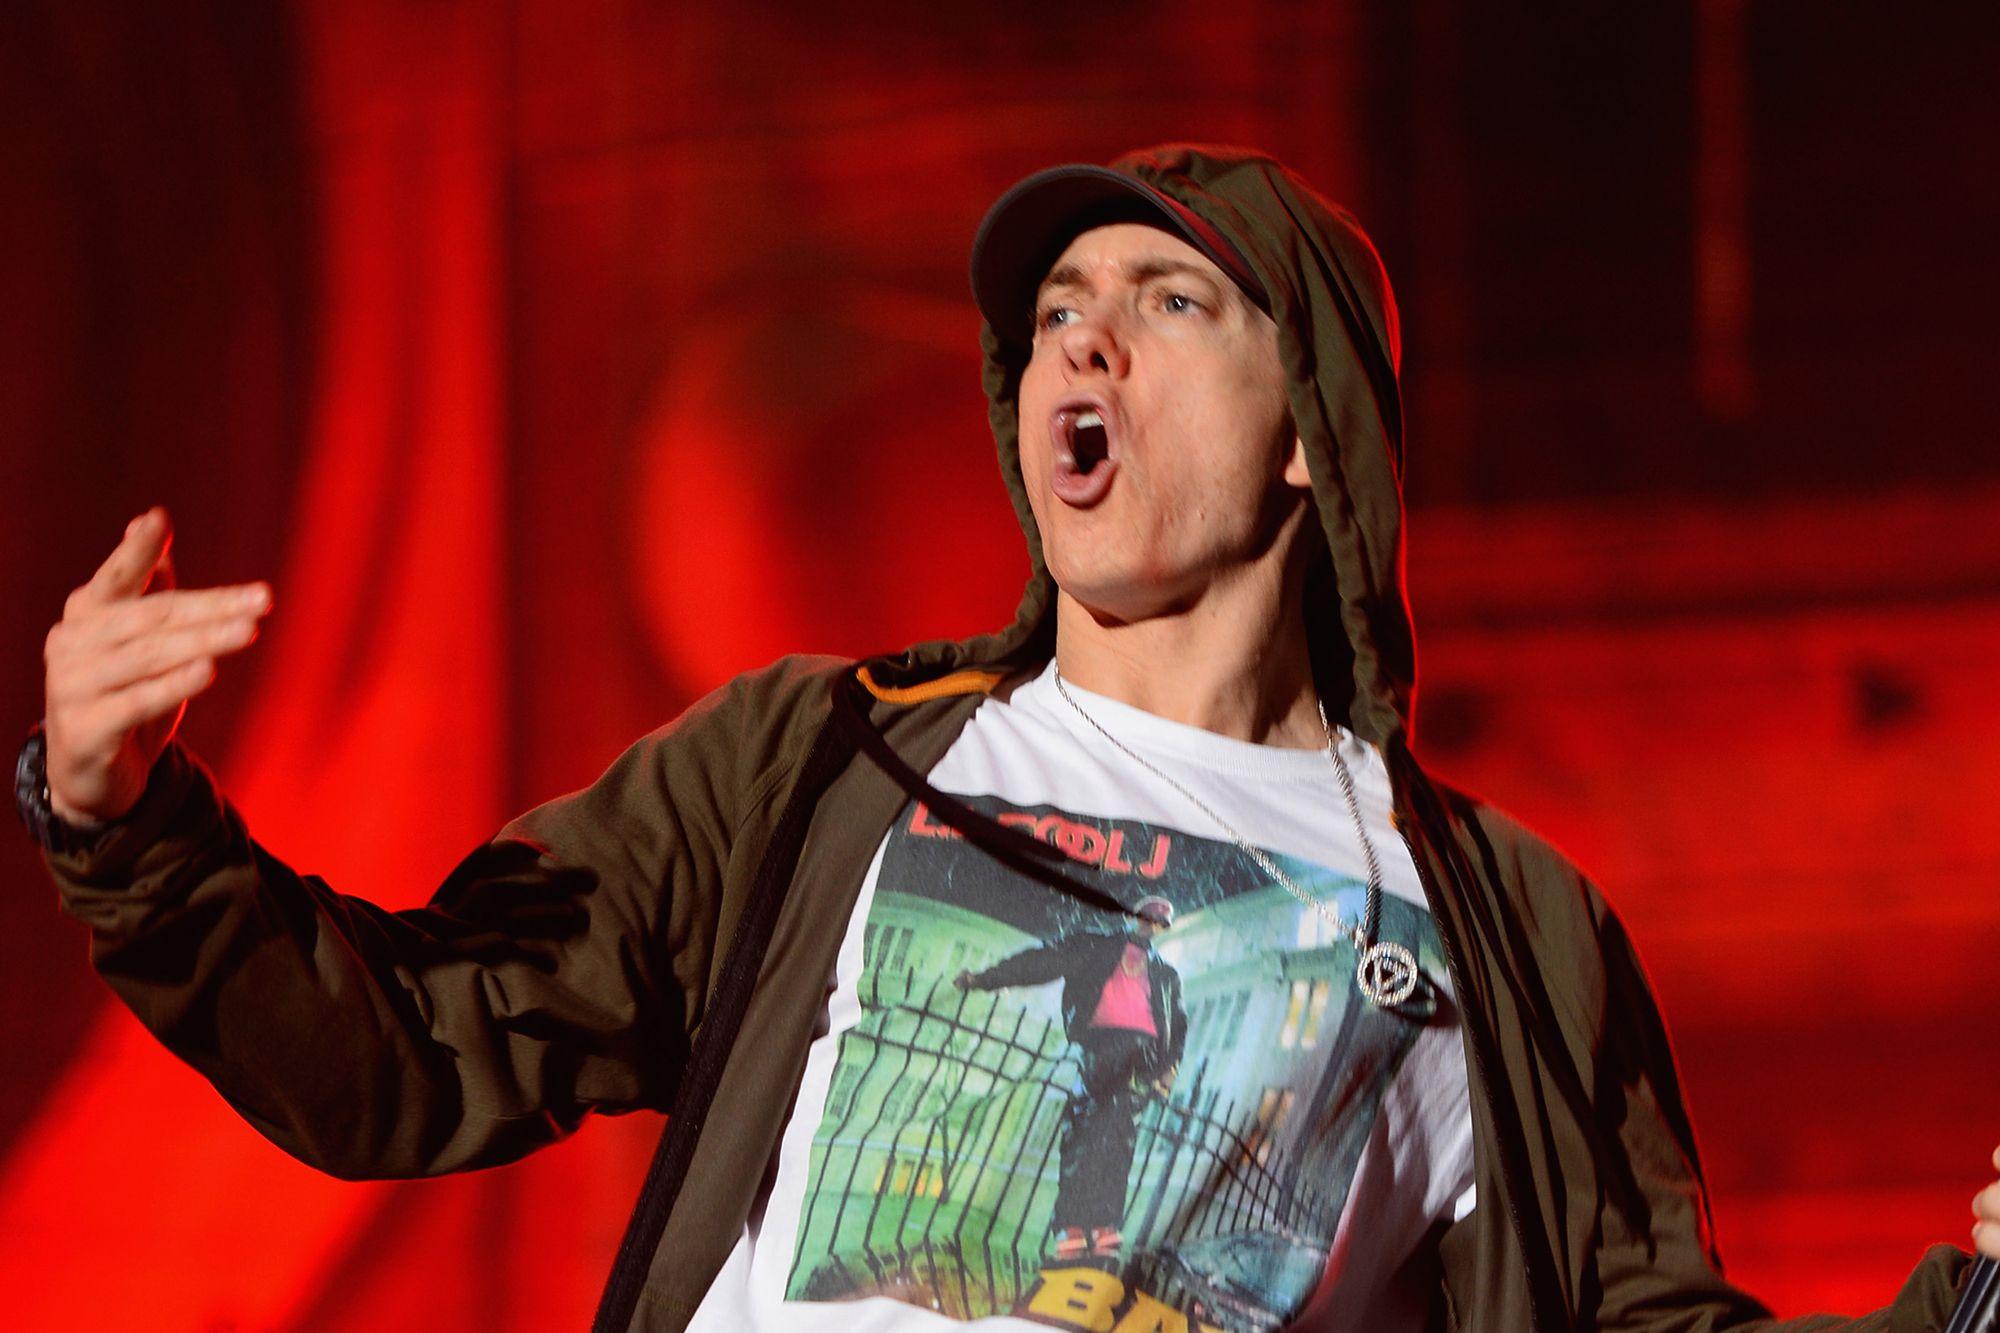 Eminem drops surprise album 'Music to Be Murdered By'